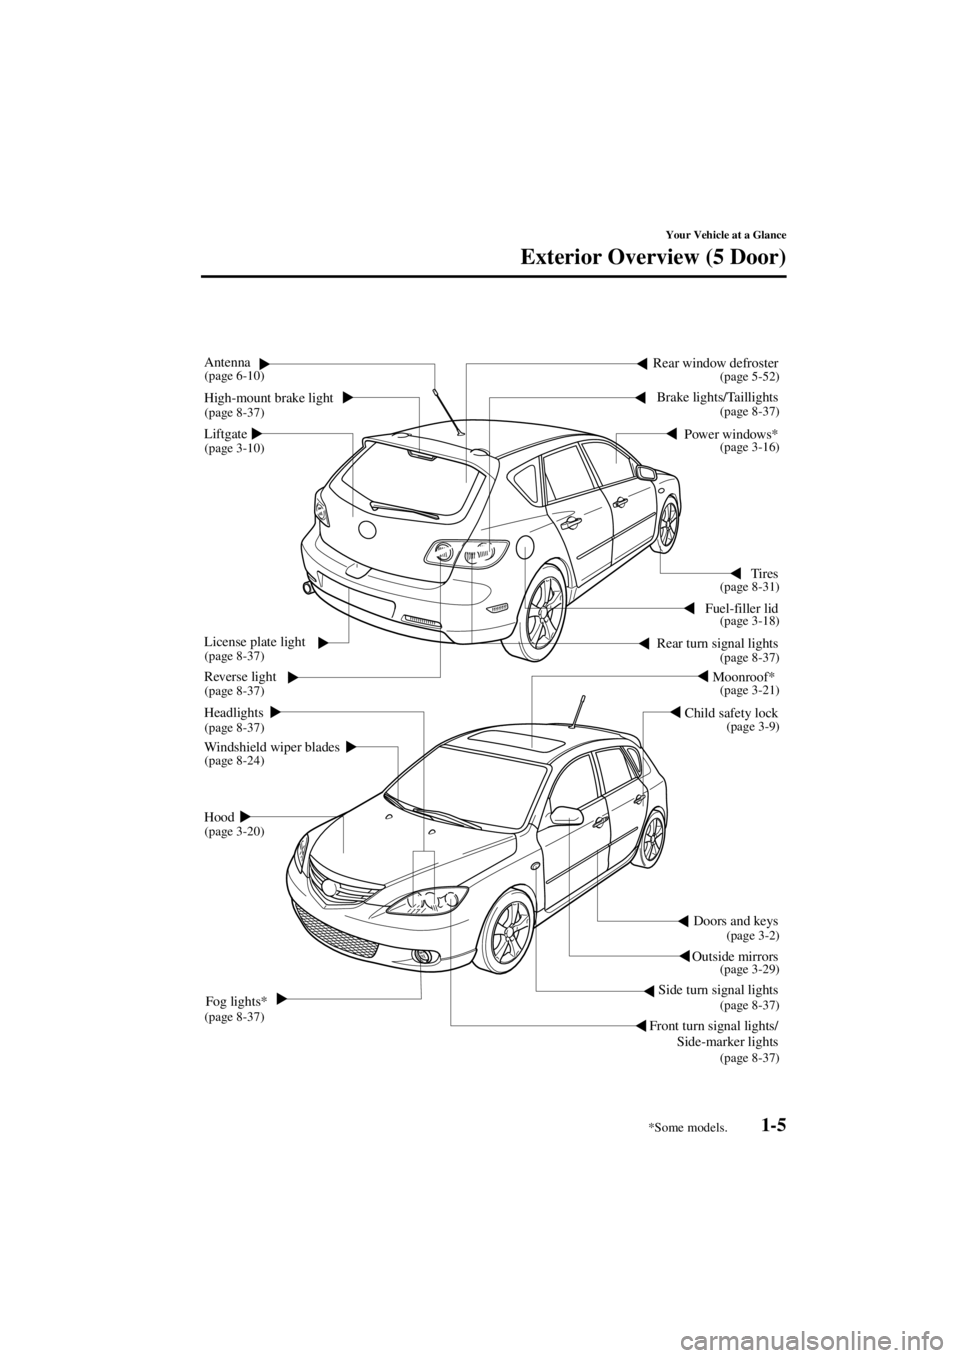 MAZDA MODEL 3 5-DOOR 2004 User Guide 1-5
Your Vehicle at a Glance
Form No. 8S18-EA-03I
Exterior Overview (5 Door)
Doors and keys
Outside mirrors
Side turn signal lights
Headlights
Fuel-filler lid
Child safety lock Tires
Reverse light
Win